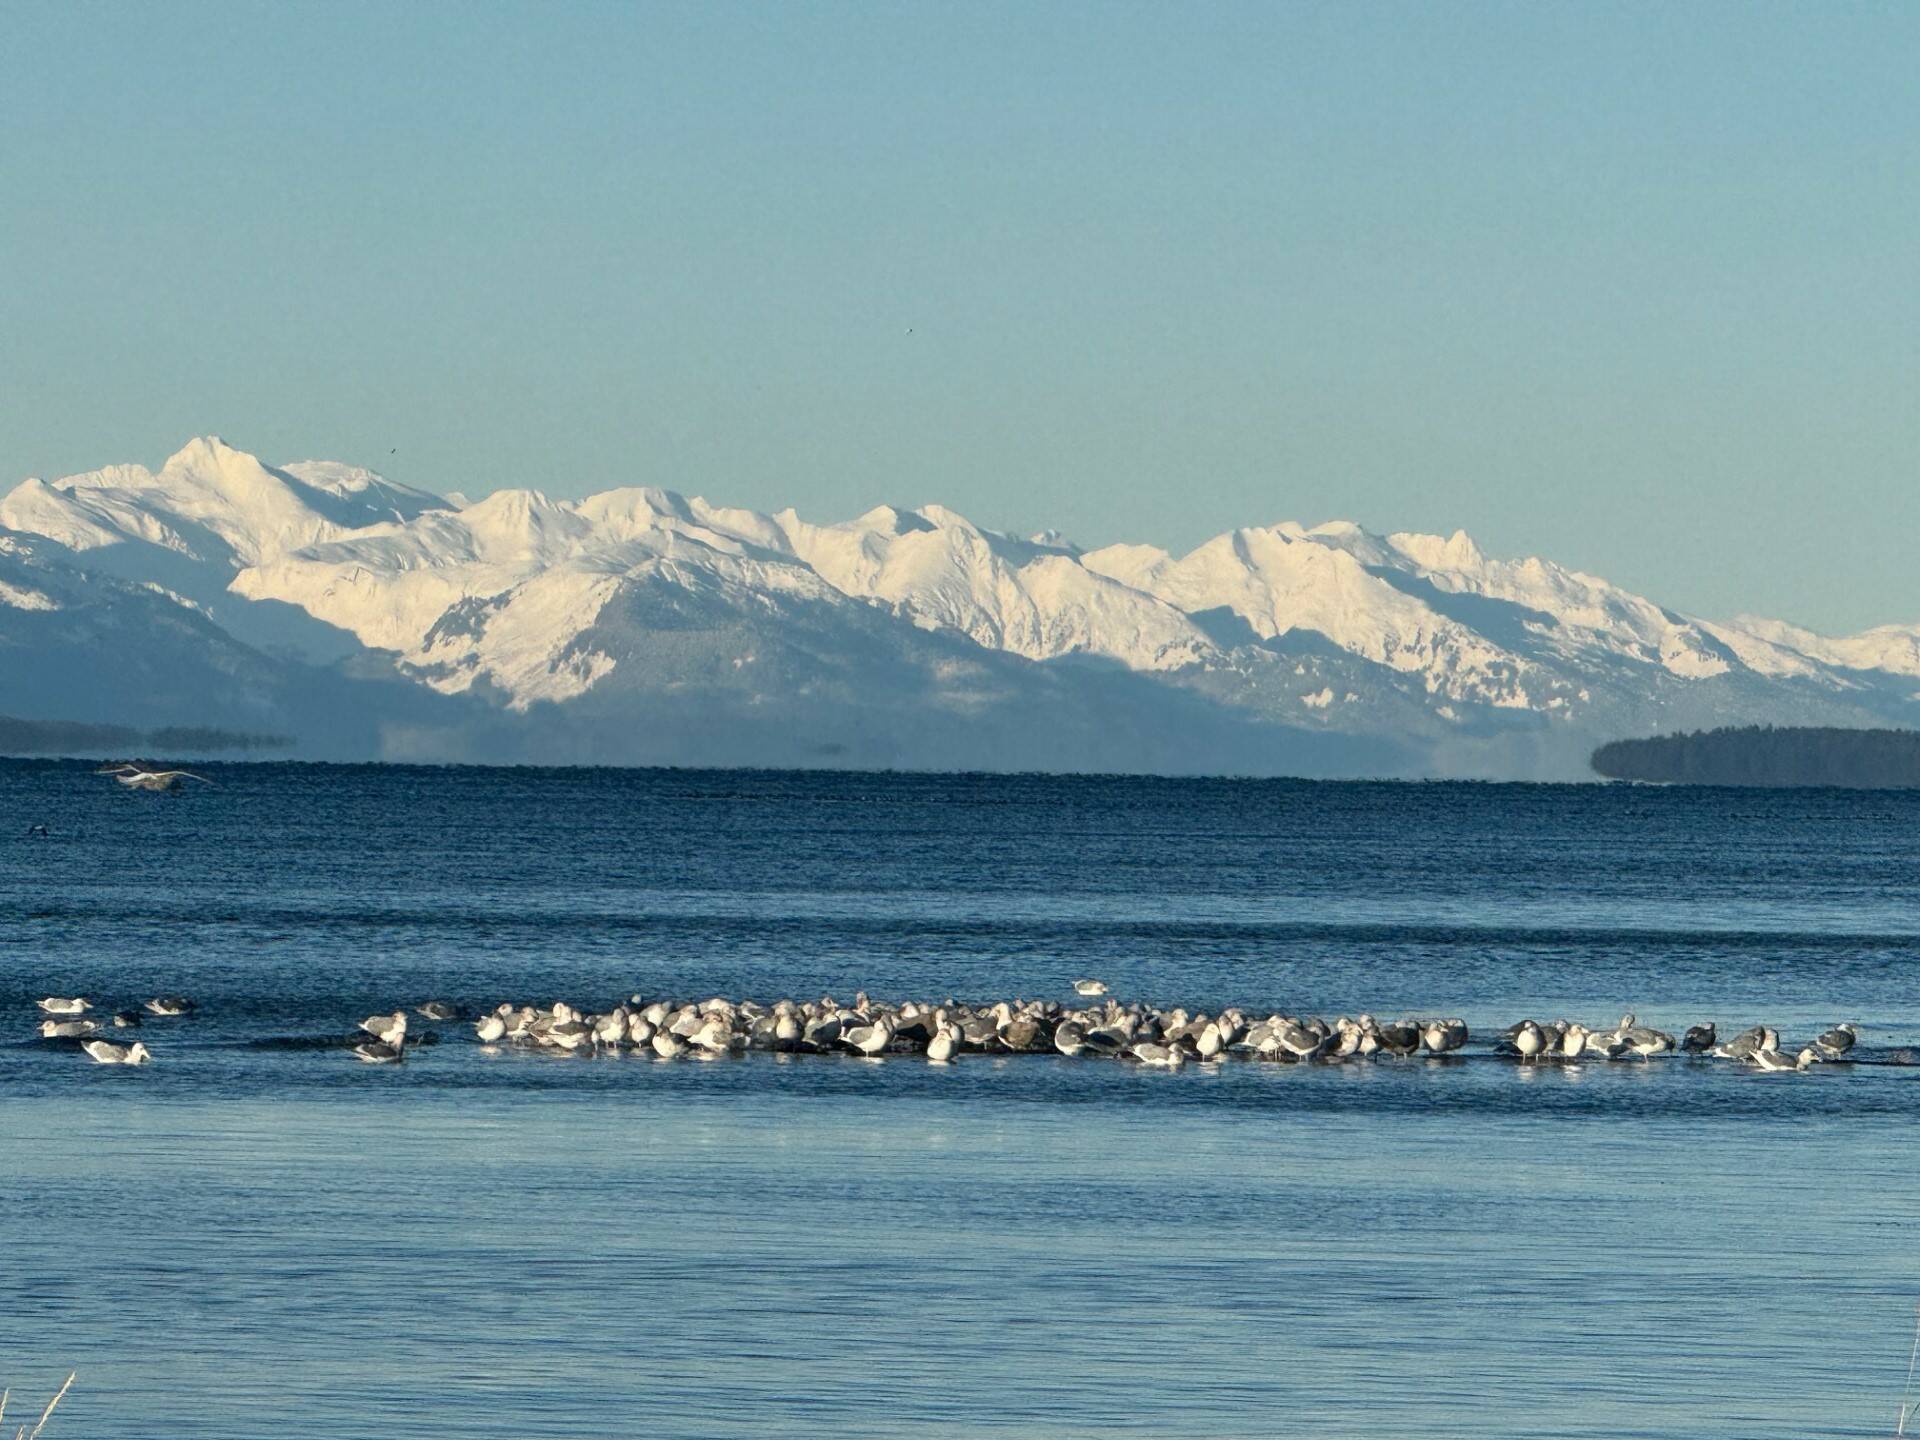 A raft of surf scoters and seagulls with the snowy Chillkats in the background on Jan. 10. (Photo by Denise Carroll)